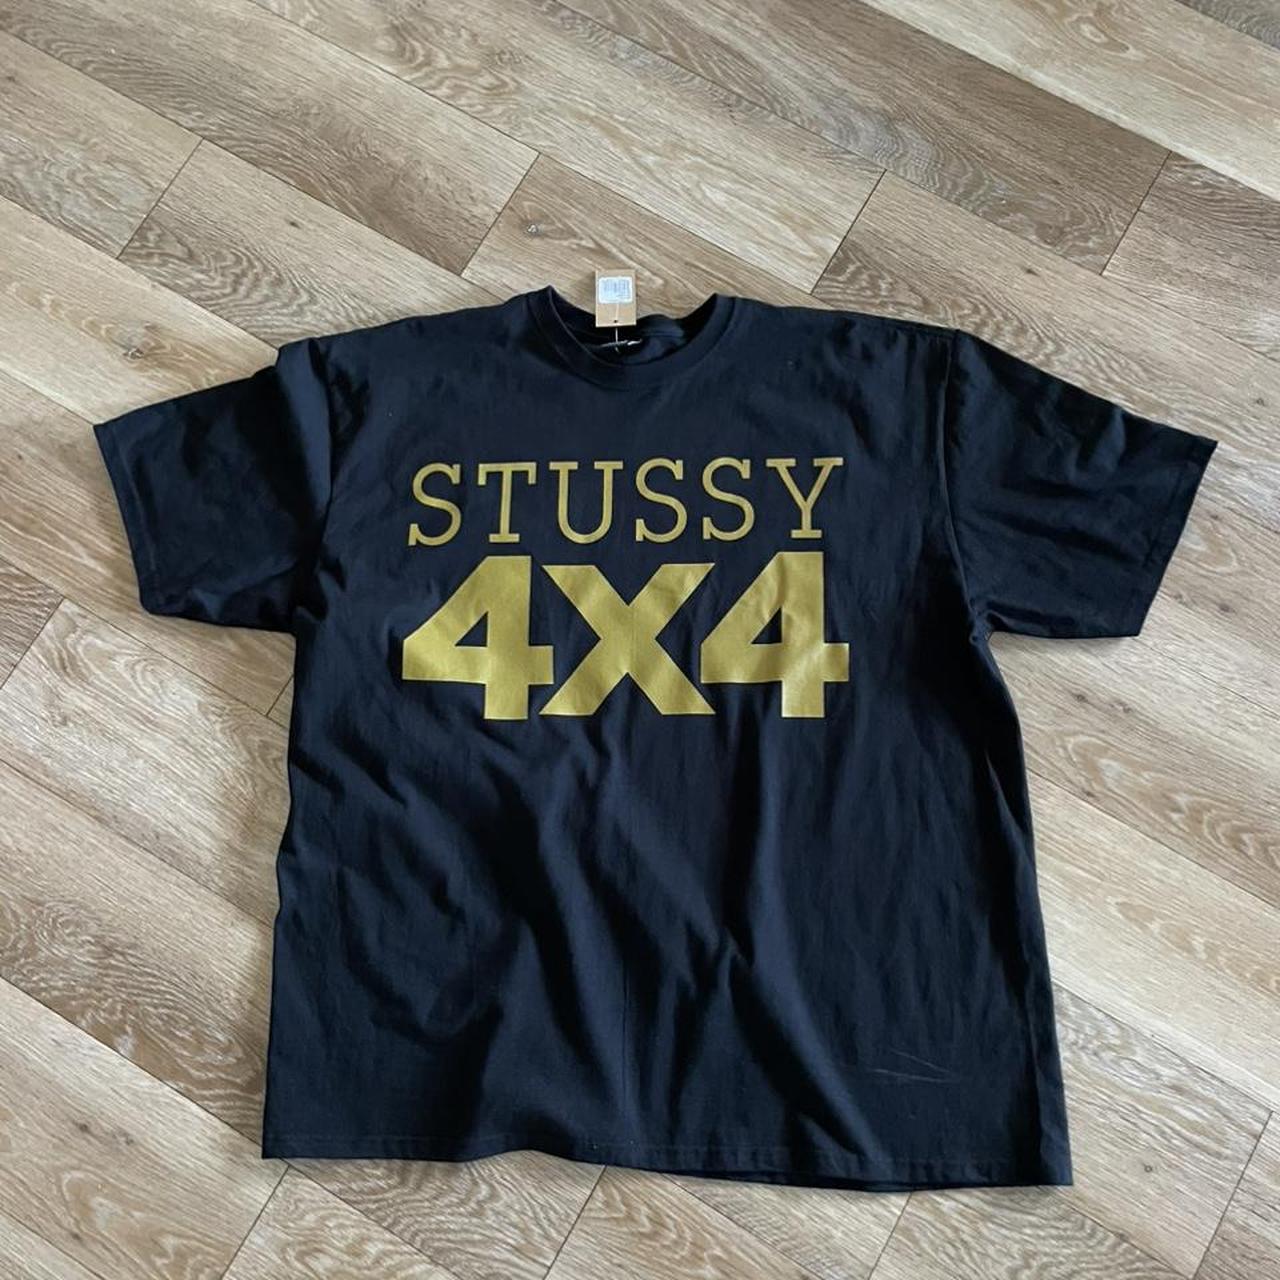 STUSSY 4x4 tee in black size 2XL. Shirt features a... - Depop